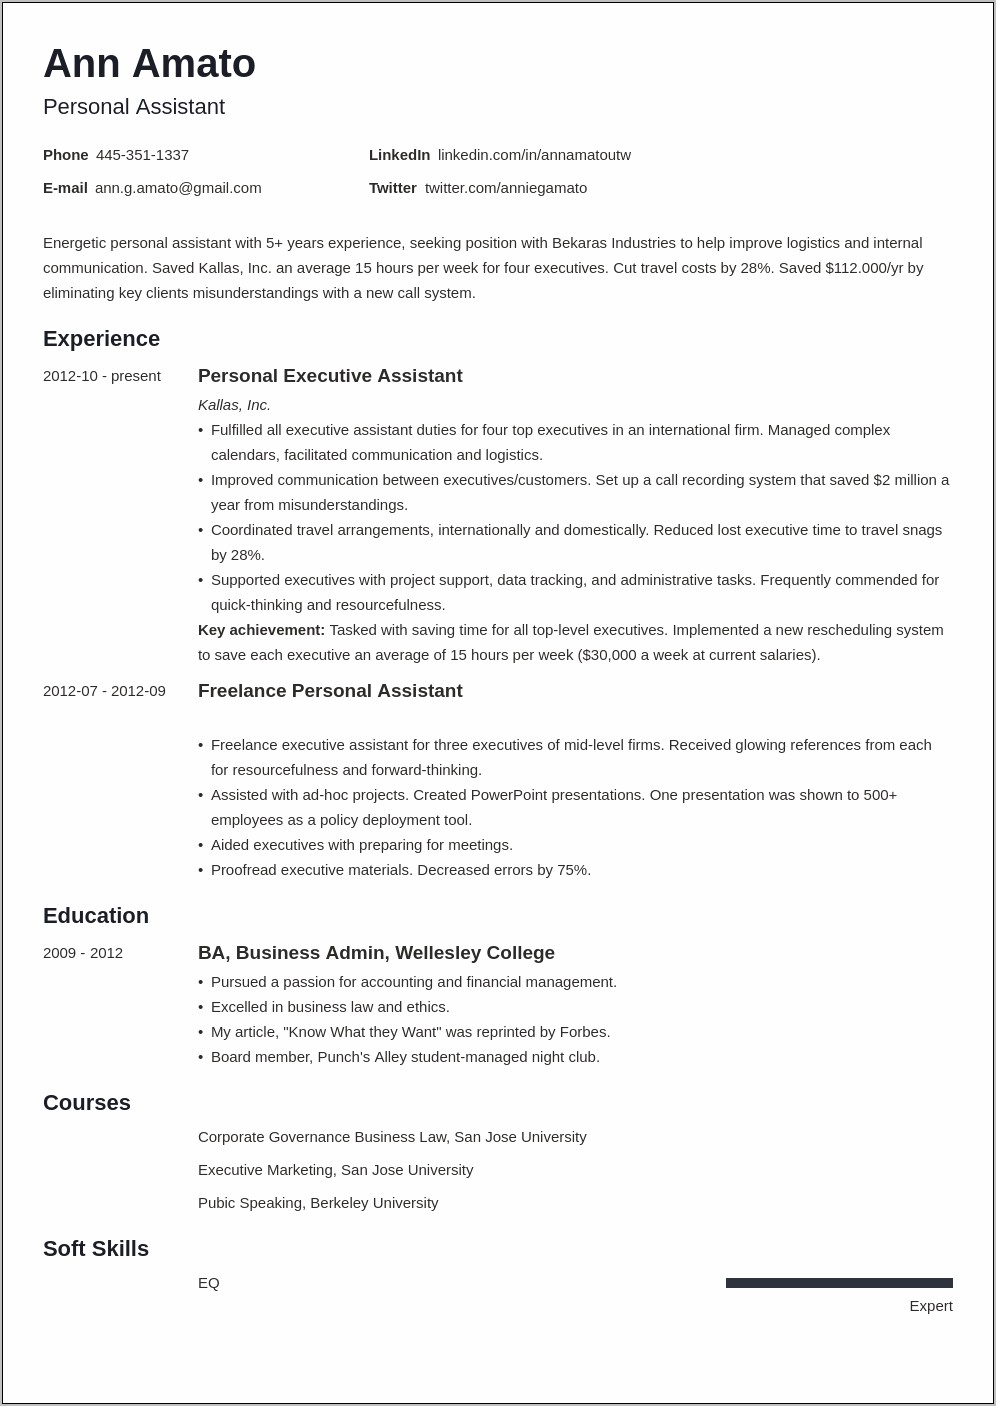 Hiding Less Experience In Resume Summary